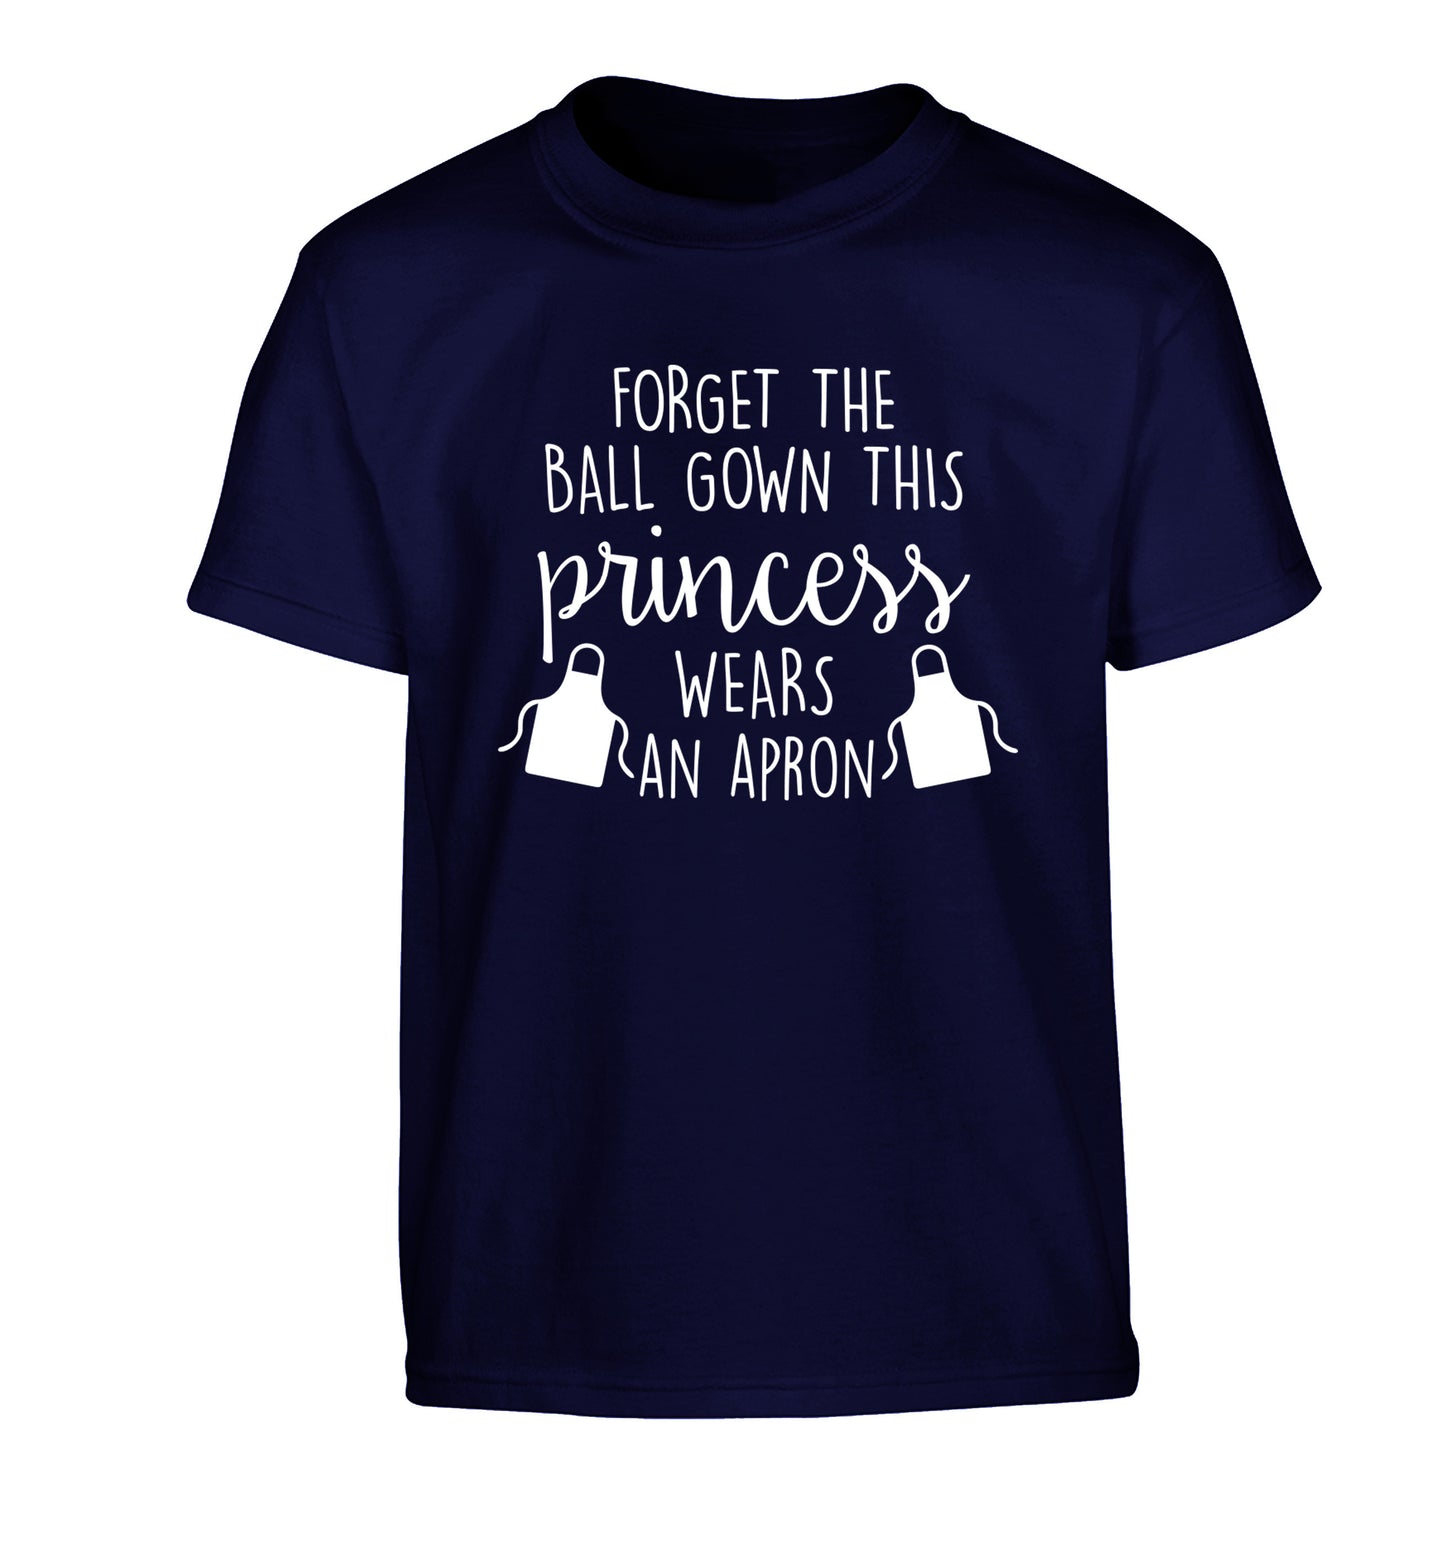 Forget the ball gown this princess wears an apron Children's navy Tshirt 12-14 Years